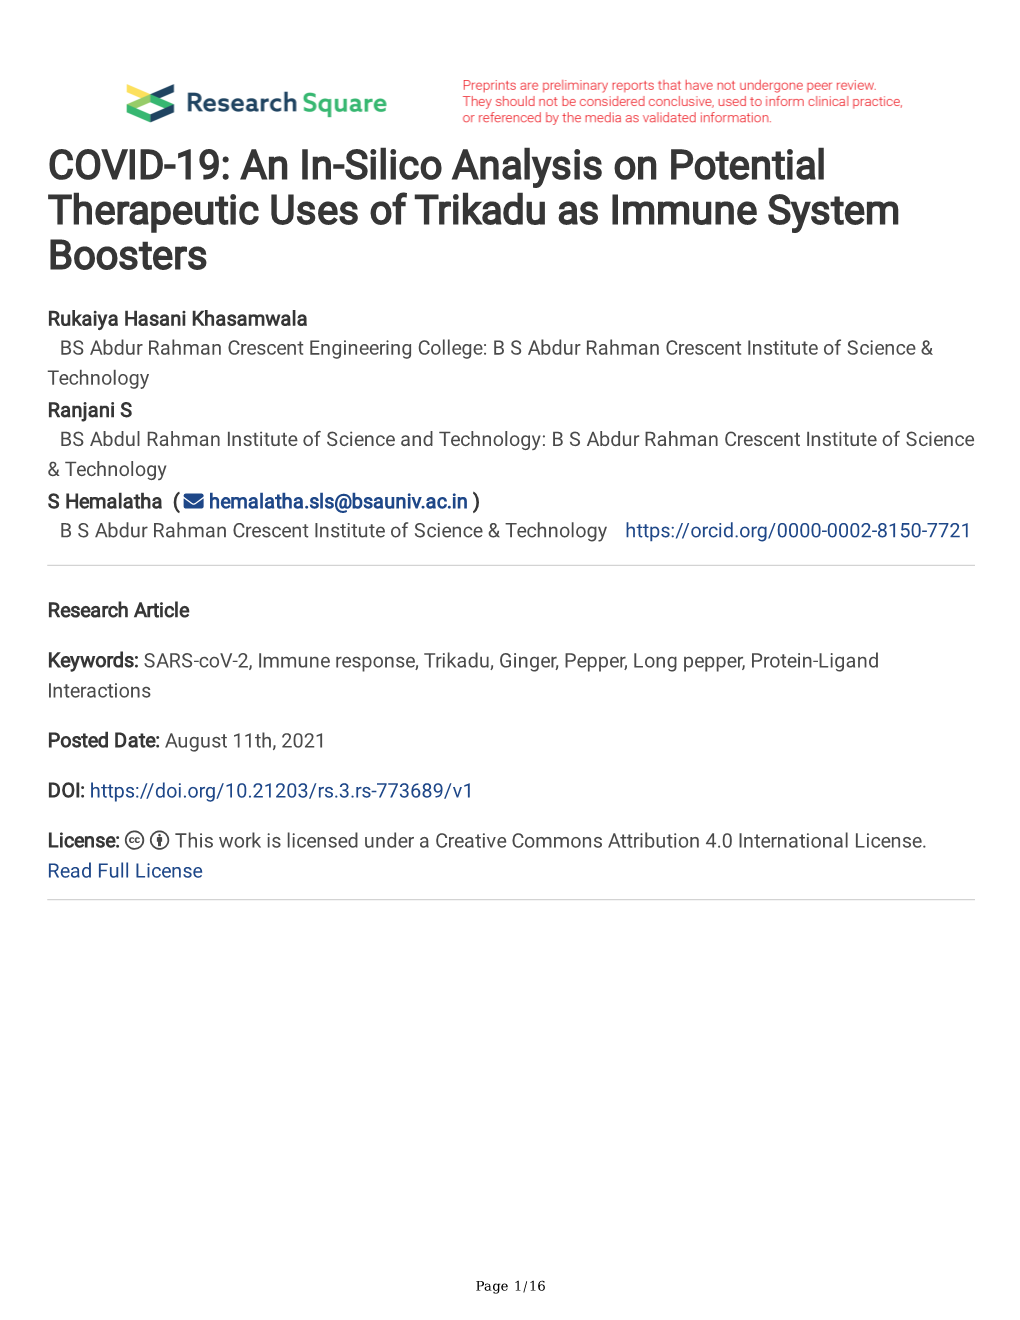 COVID-19: an In-Silico Analysis on Potential Therapeutic Uses of Trikadu As Immune System Boosters